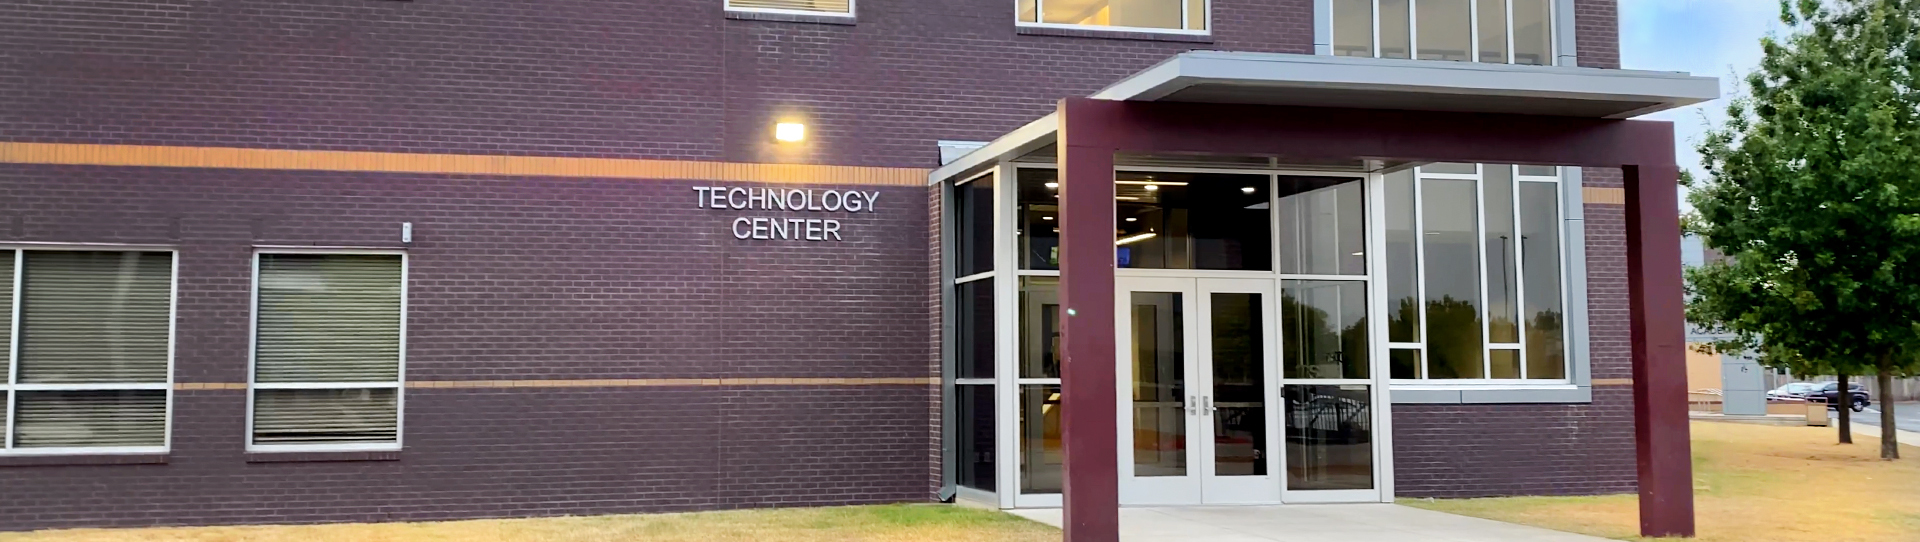 Image of the Jenks Technology Center building